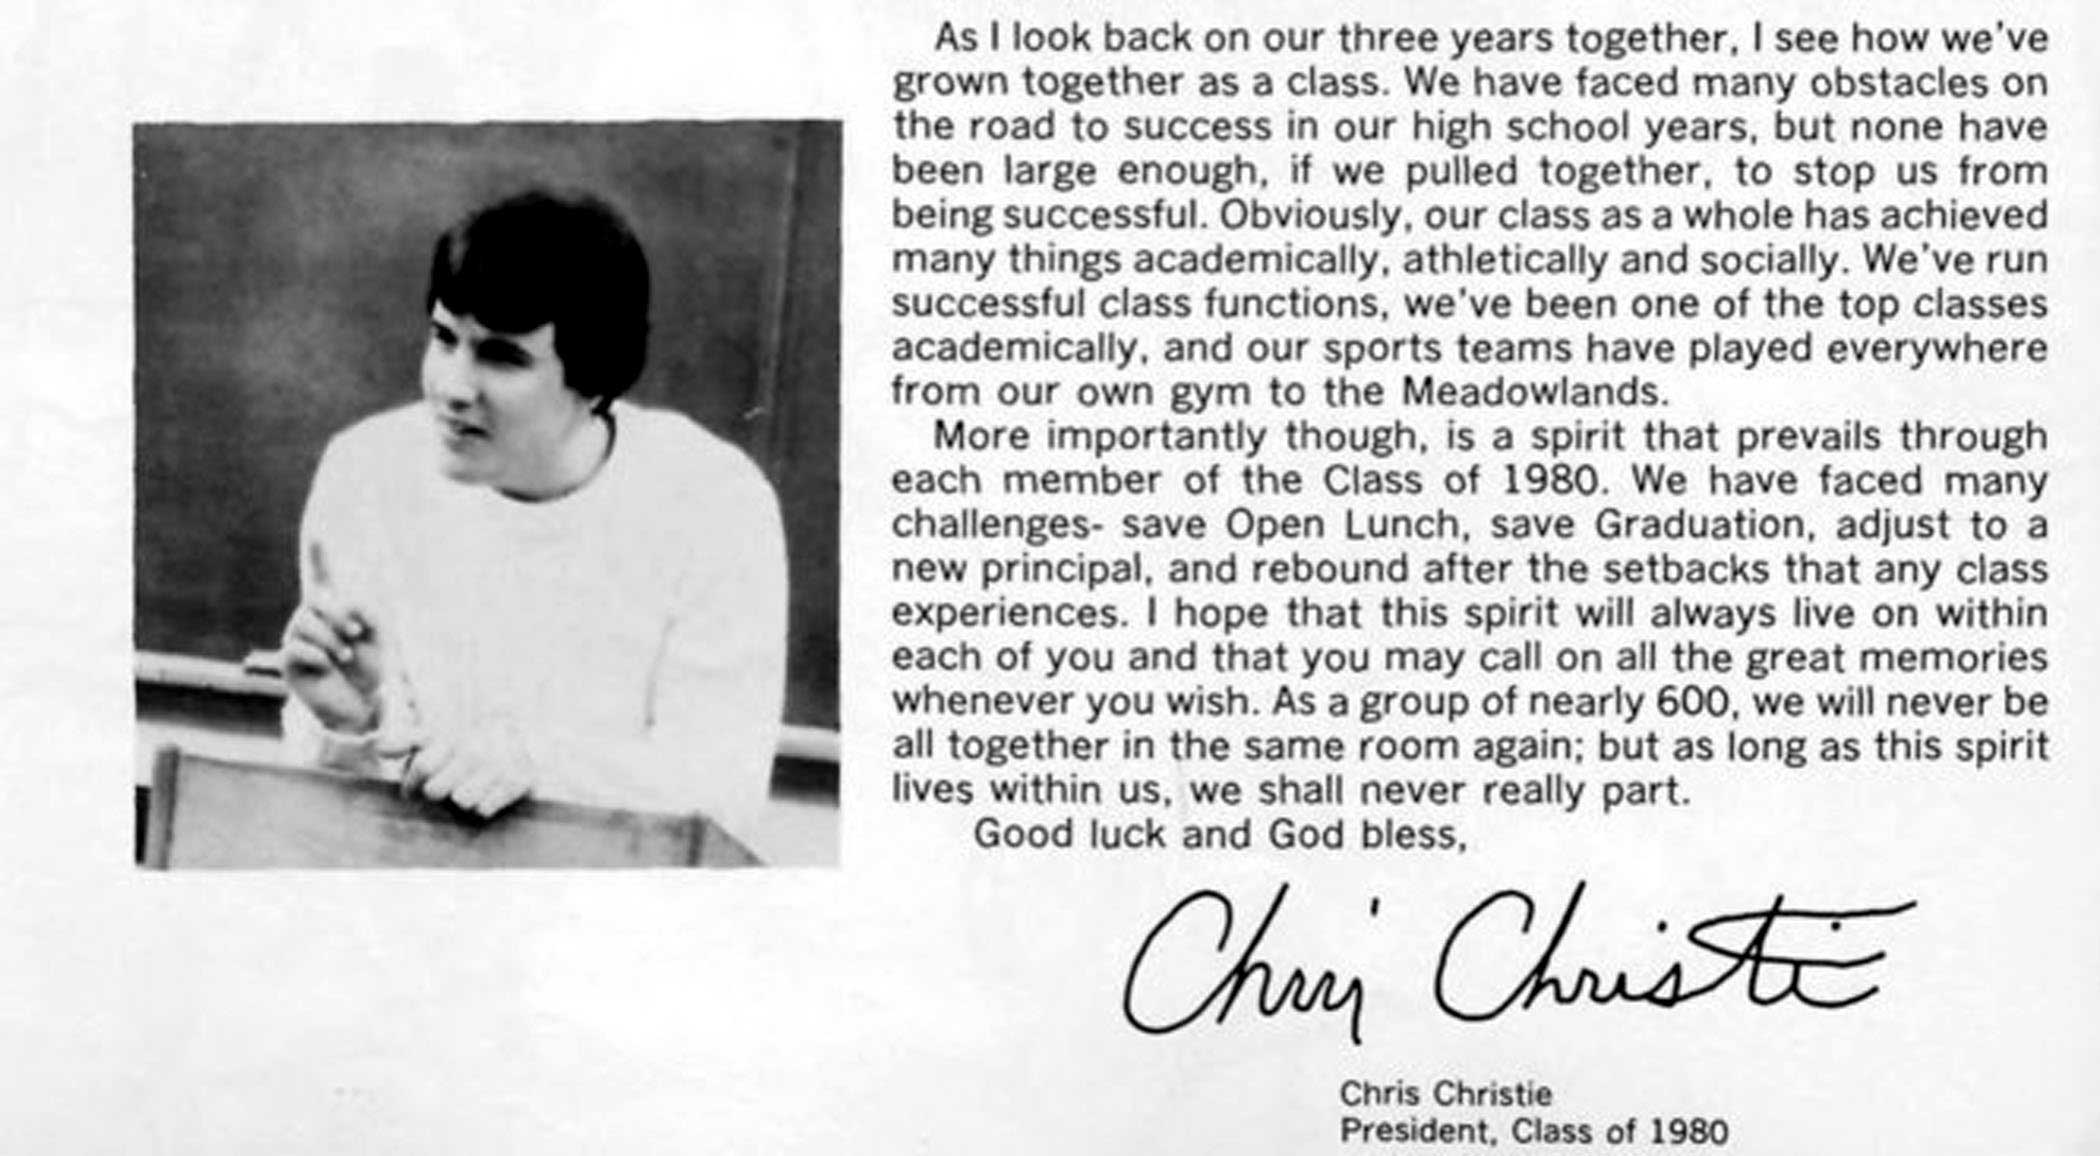 Livingston High School 's yearbook profile on Chris Christie in 1980.